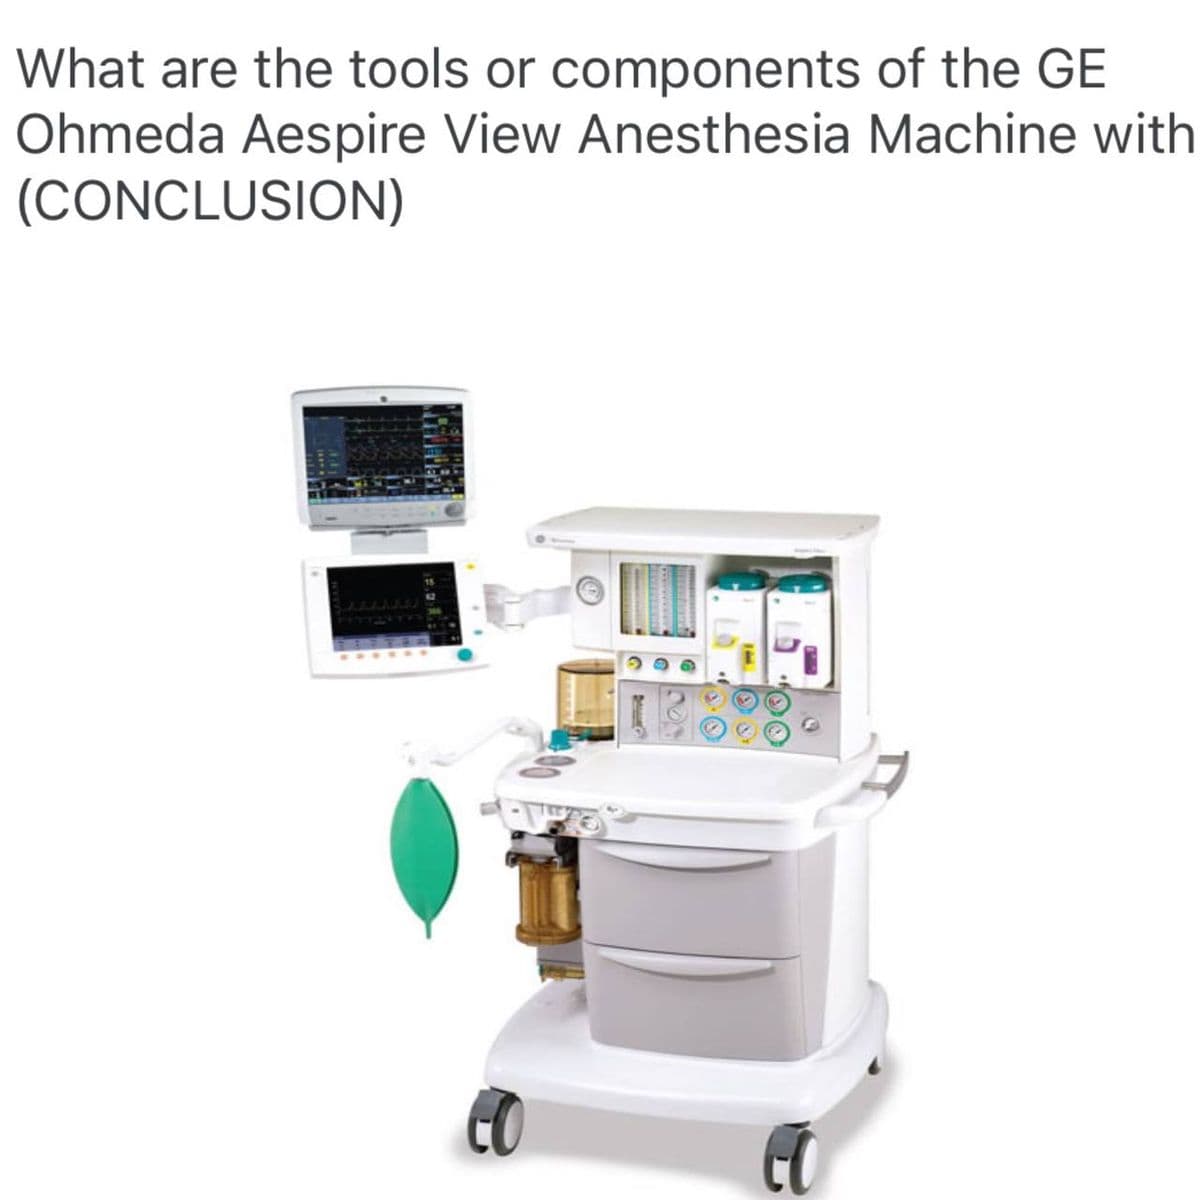 What are the tools or components
Ohmeda Aespire View Anesthesia
(CONCLUSION)
TO
CO
of the GE
Machine with